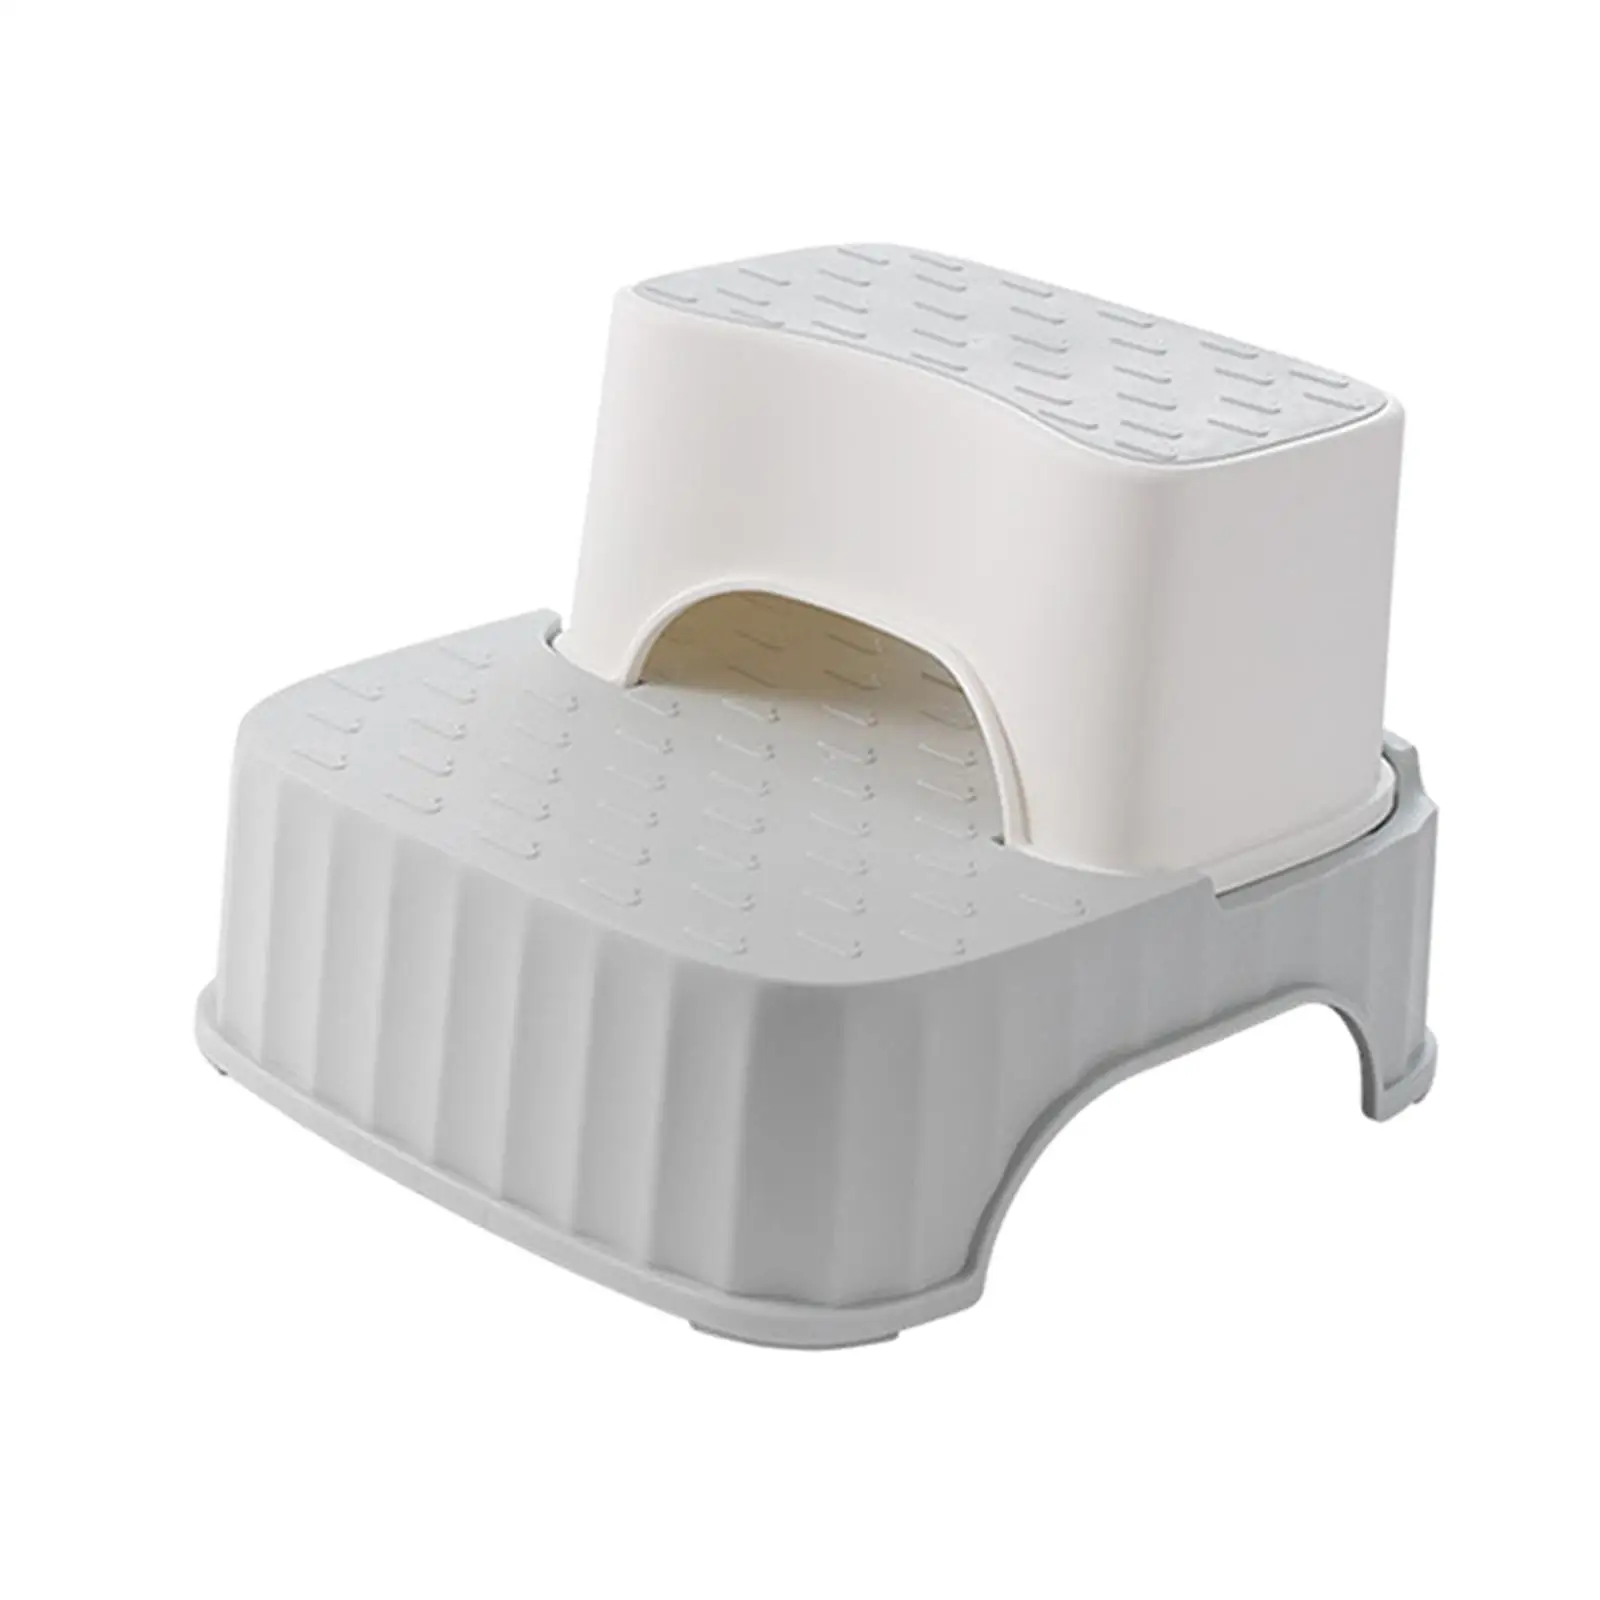 Portable Toilet Step Stool Toilet Step Stool Foot Rest Cushion Bedside Step Stool Foot Stool for Bathroom Home Gifts